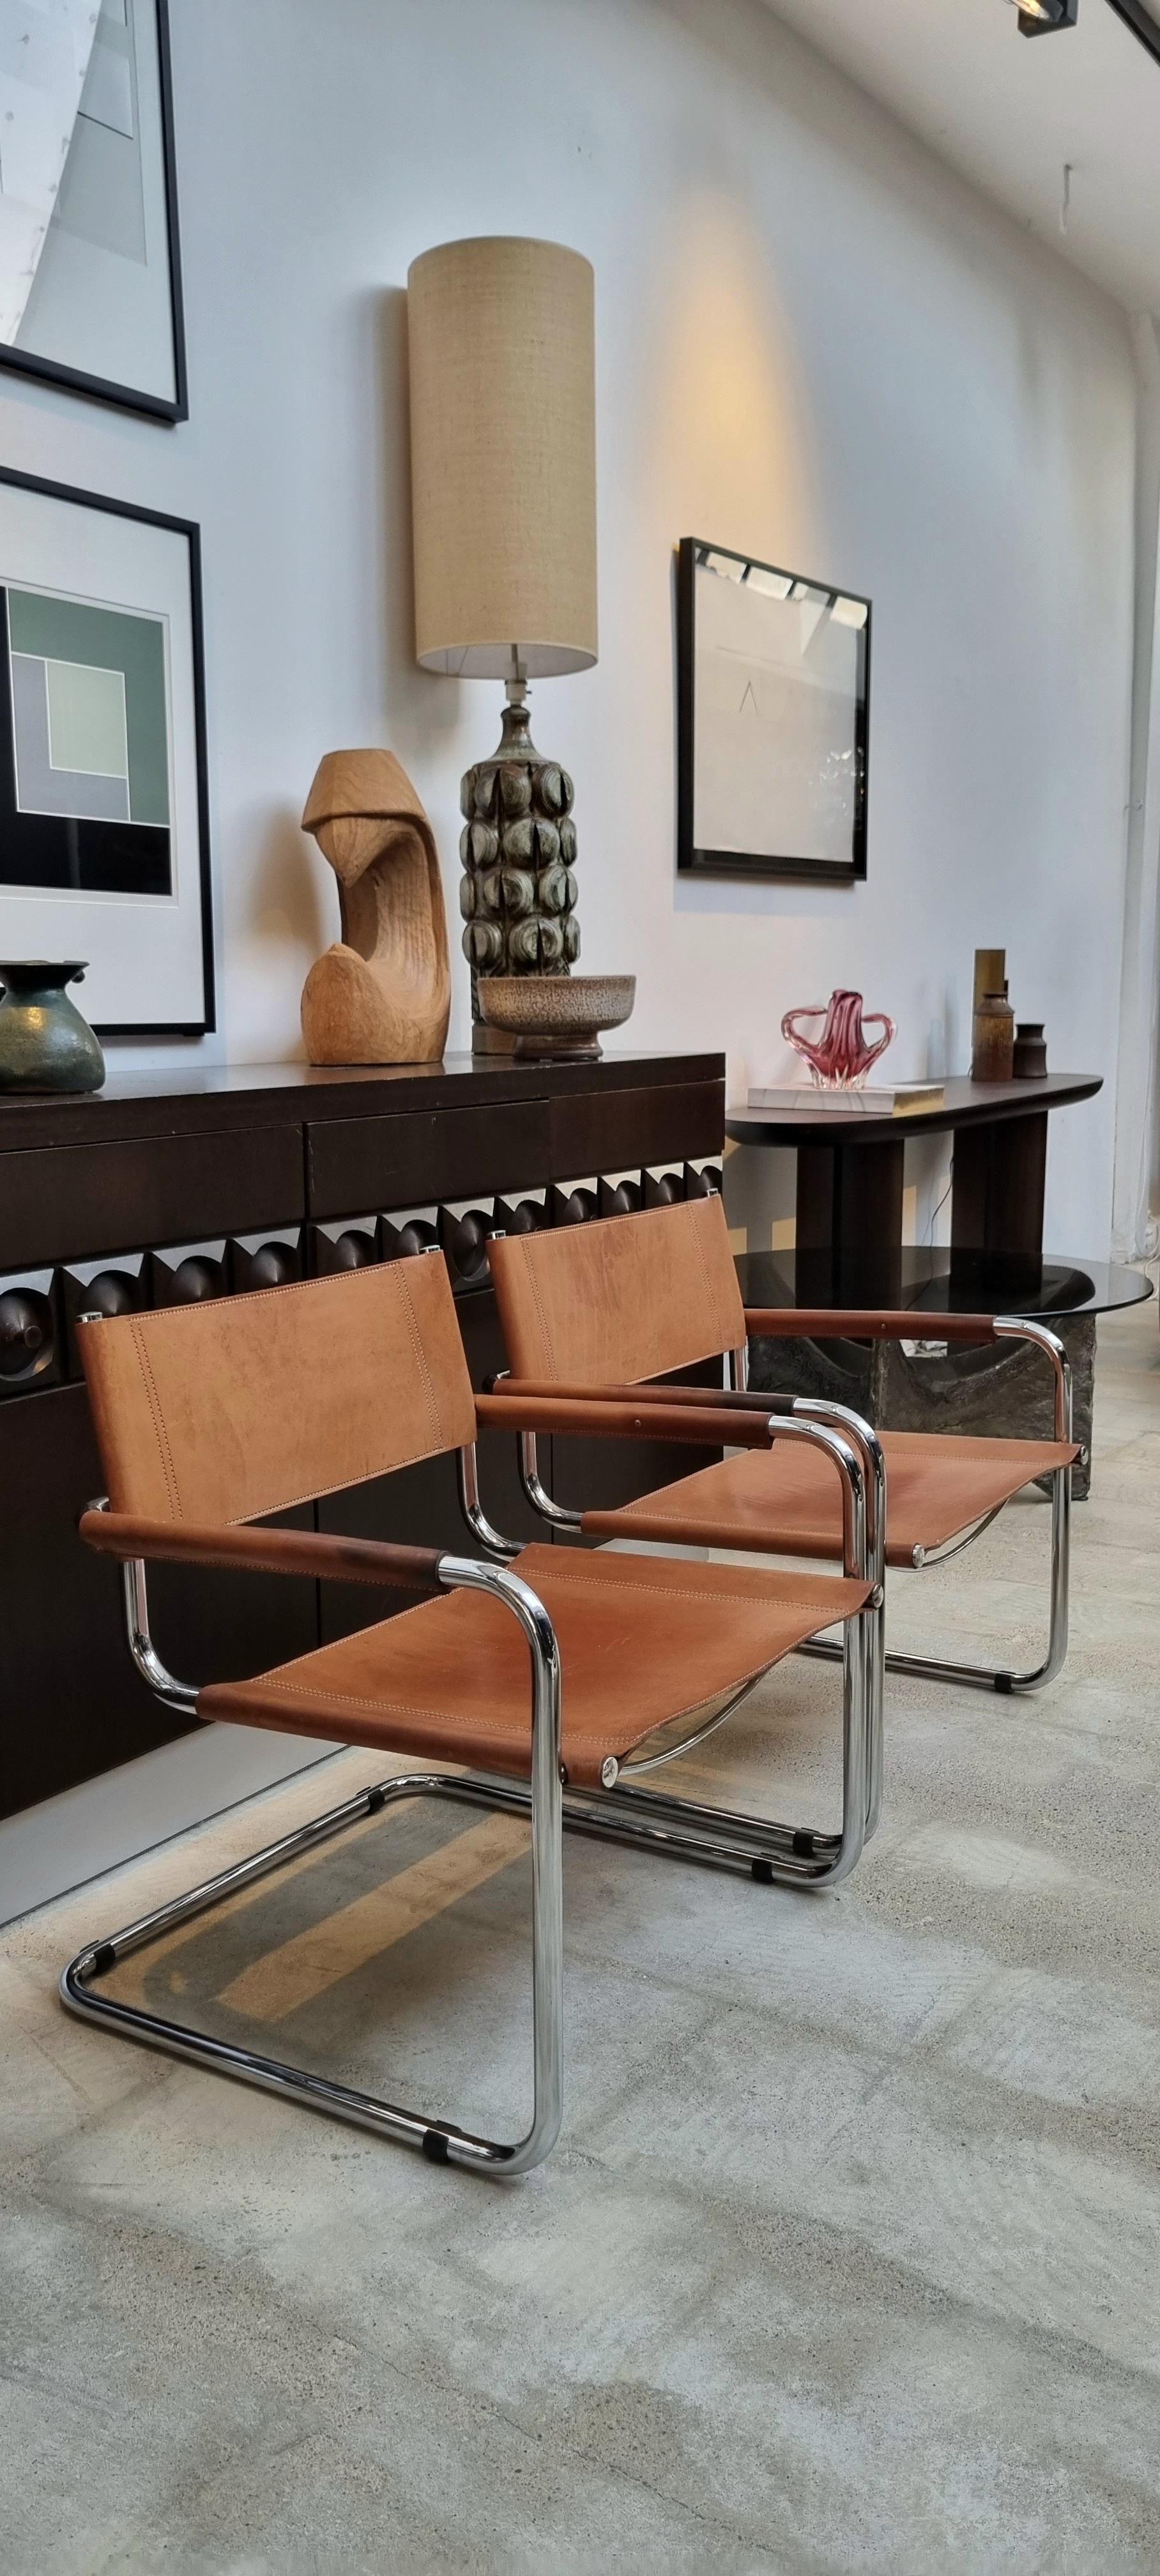 Early 20th century designed lounge chair by Marcel Breuer featuring a cantilever chrome and tan leather lounge chair.

The chair is presented in very good vintage condition with marks and patina to the leather, as shown, here and there commensurate